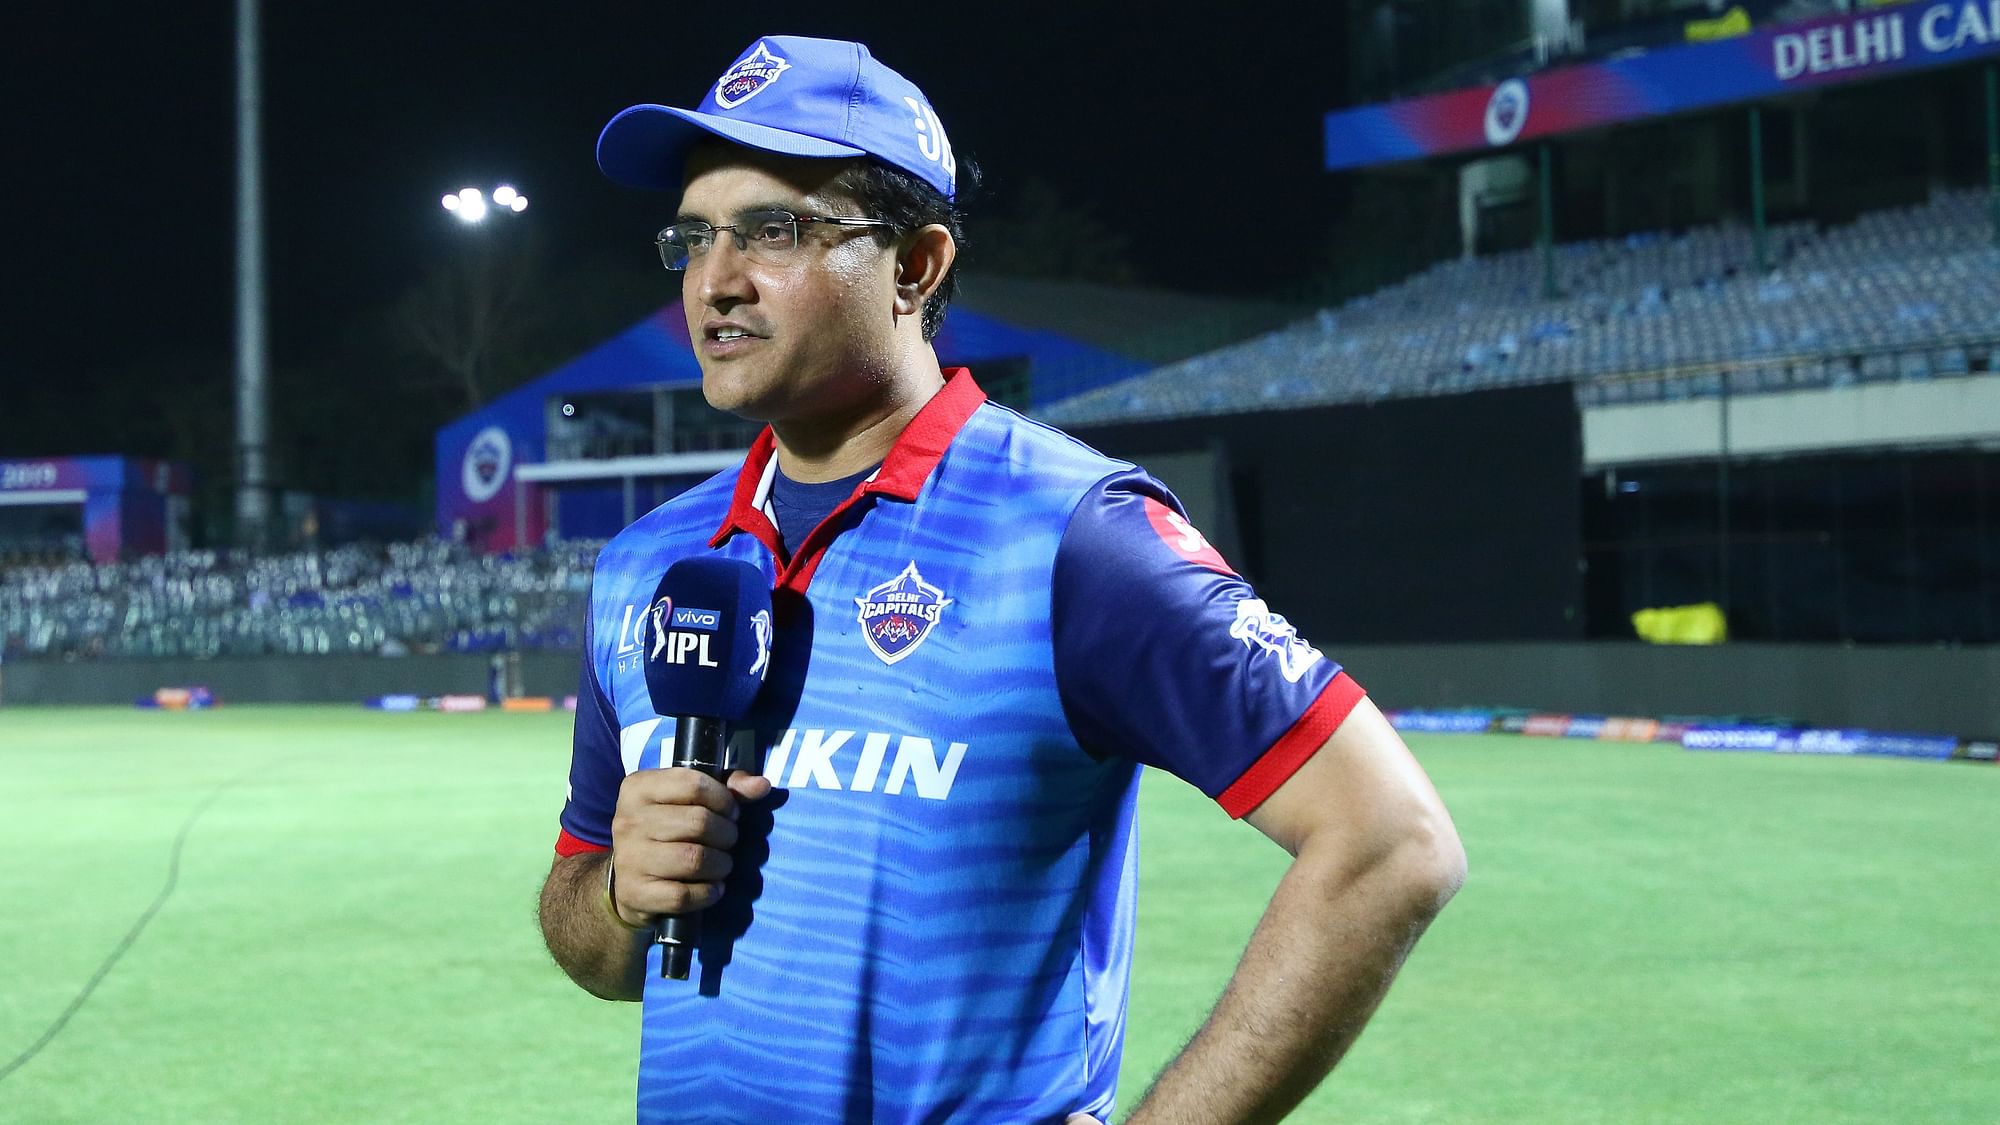 <div class="paragraphs"><p>Sourav Ganguly has recently joined Delhi Capitals as the Director of Cricket</p></div>